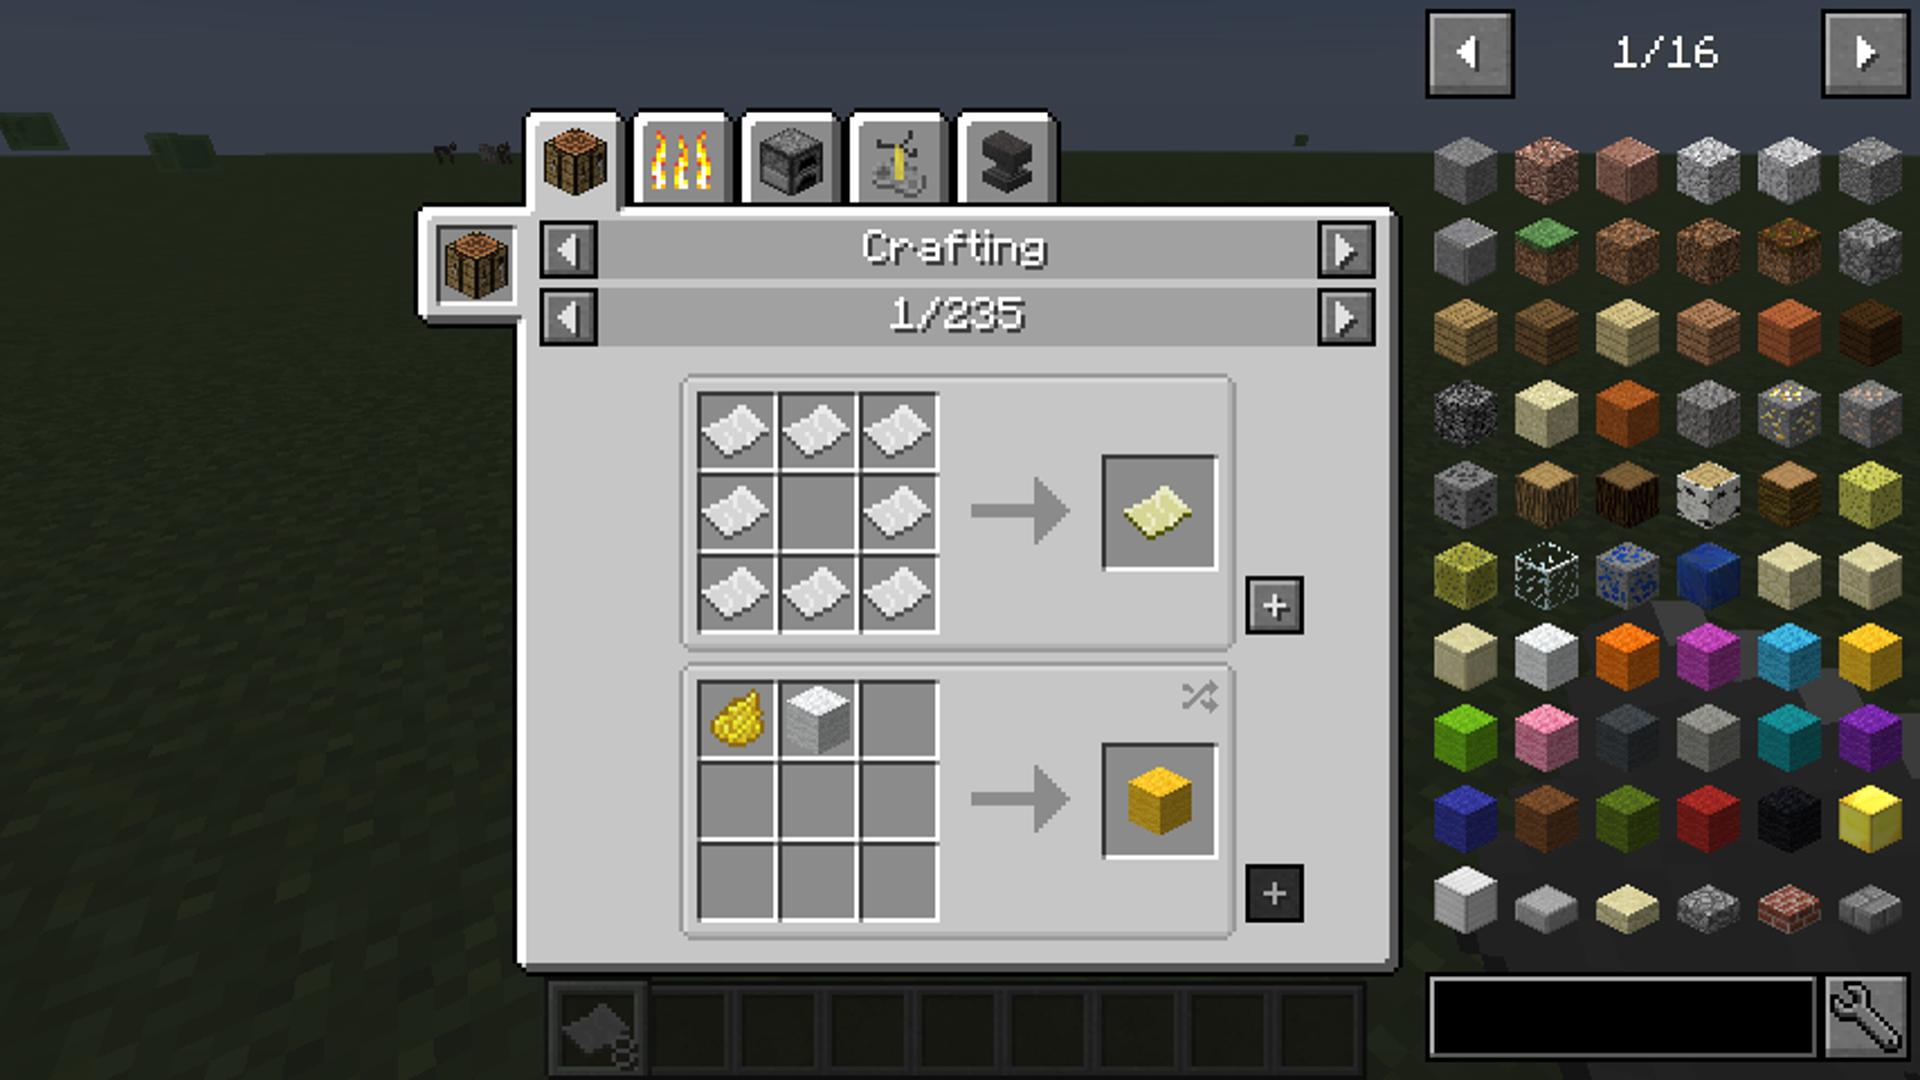 Best Minecraft mods: the user interface of the Just Enough Items mod.